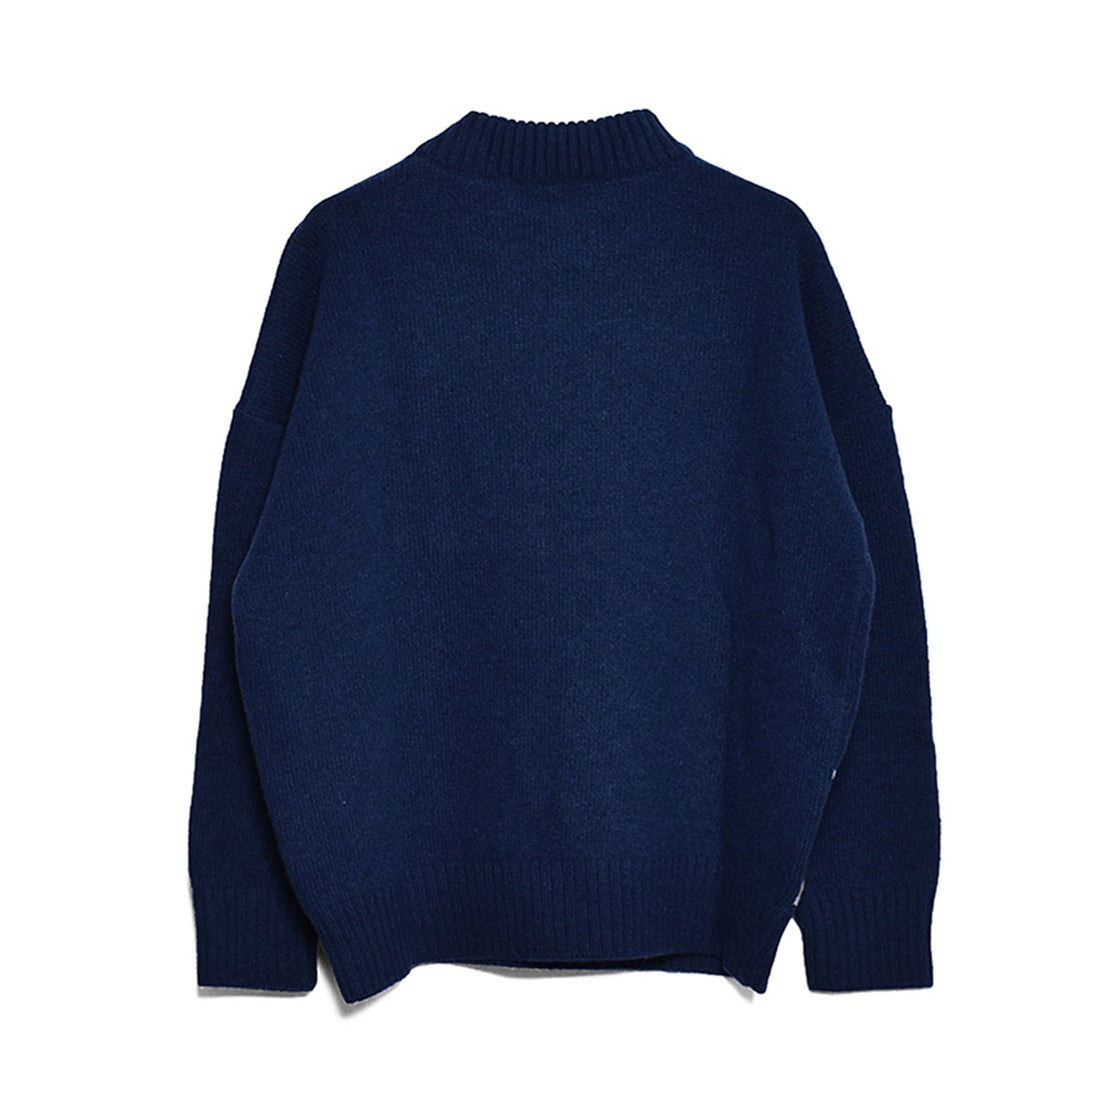 [S.S. Daley]KNIT SWEATER WITH DUCK INTARSIA/NAVY(SSDF23DUCKC)